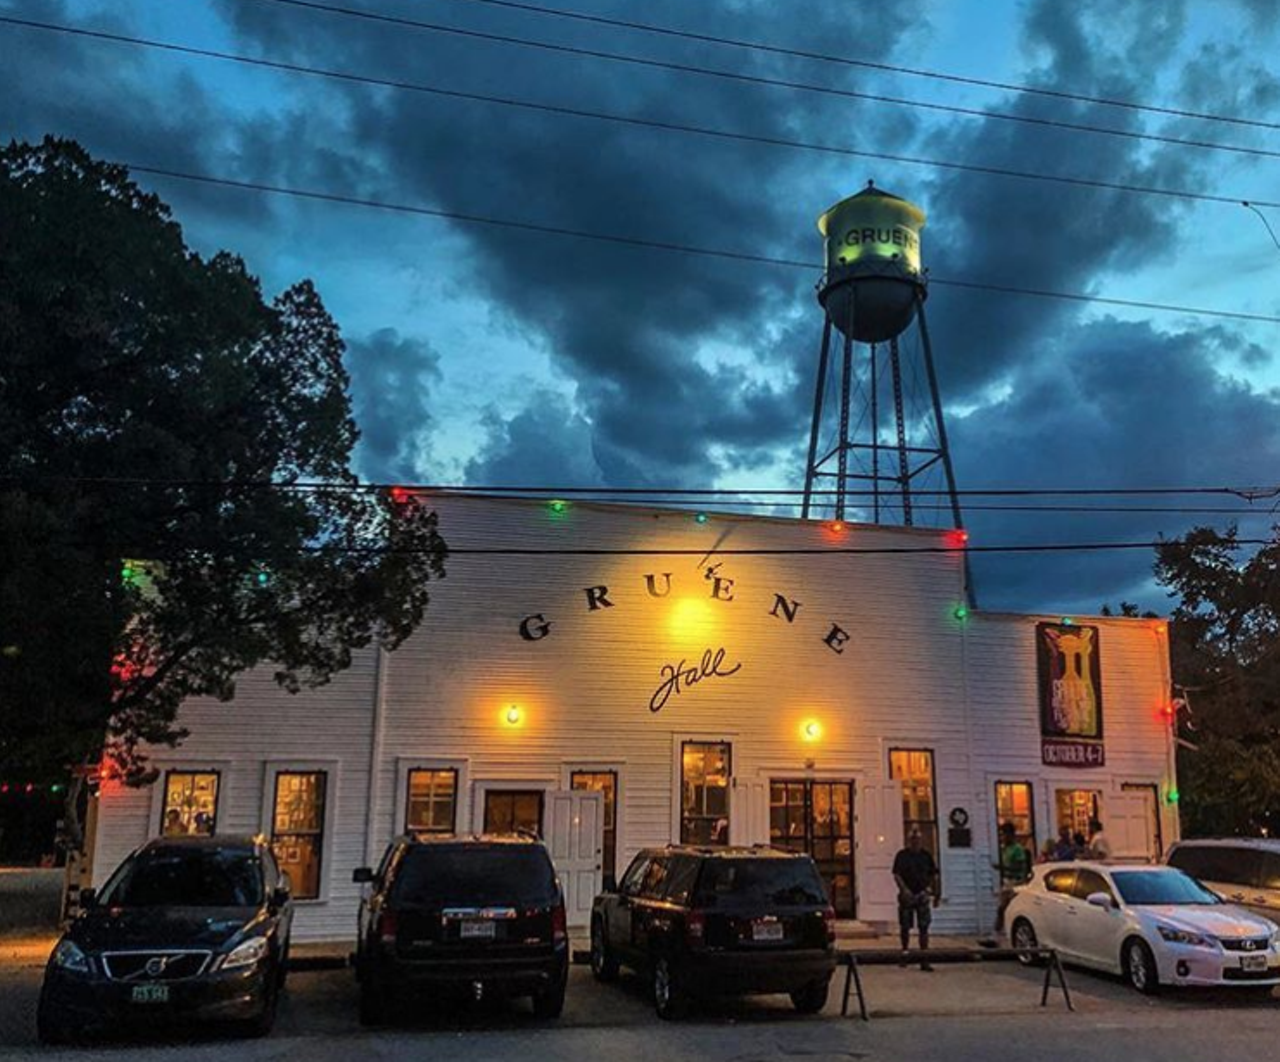 Gruene
Take a drive up to Gruene (may we suggest Gruene Hall?) and admire the simple lights in this simple town. And heck, while you’re there you might as well stop in for a beer or two.
Photo via Instagram / tepplerphotography